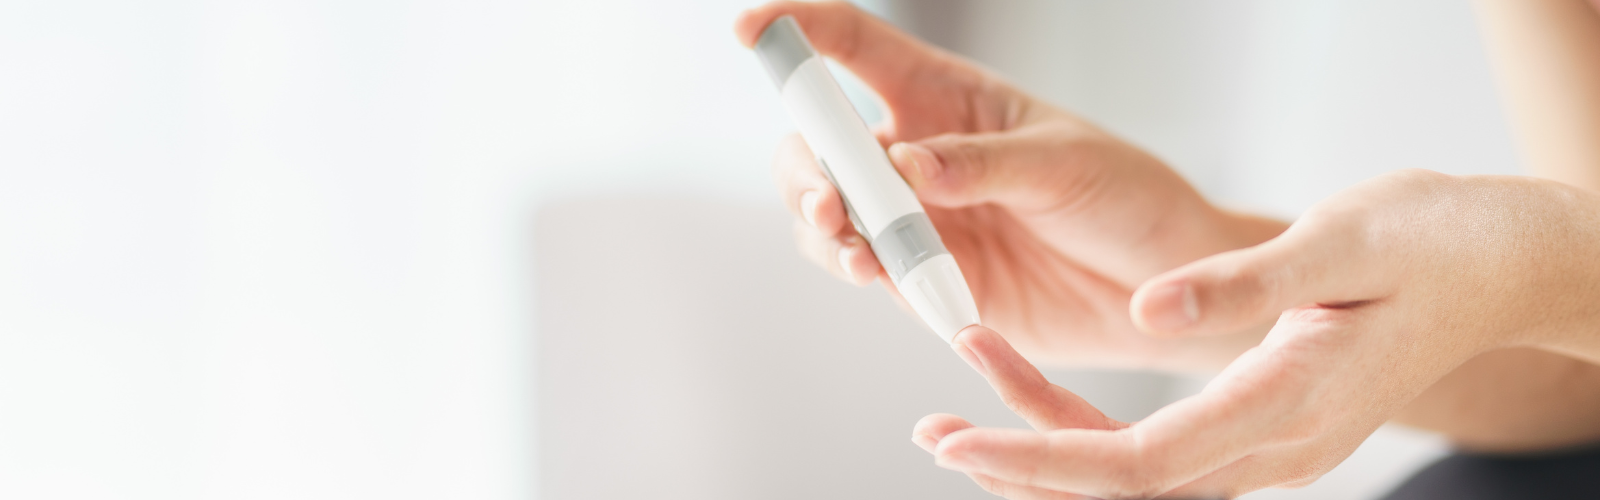 Utilizing real-world data to uncover health inequities in type 2 diabetes